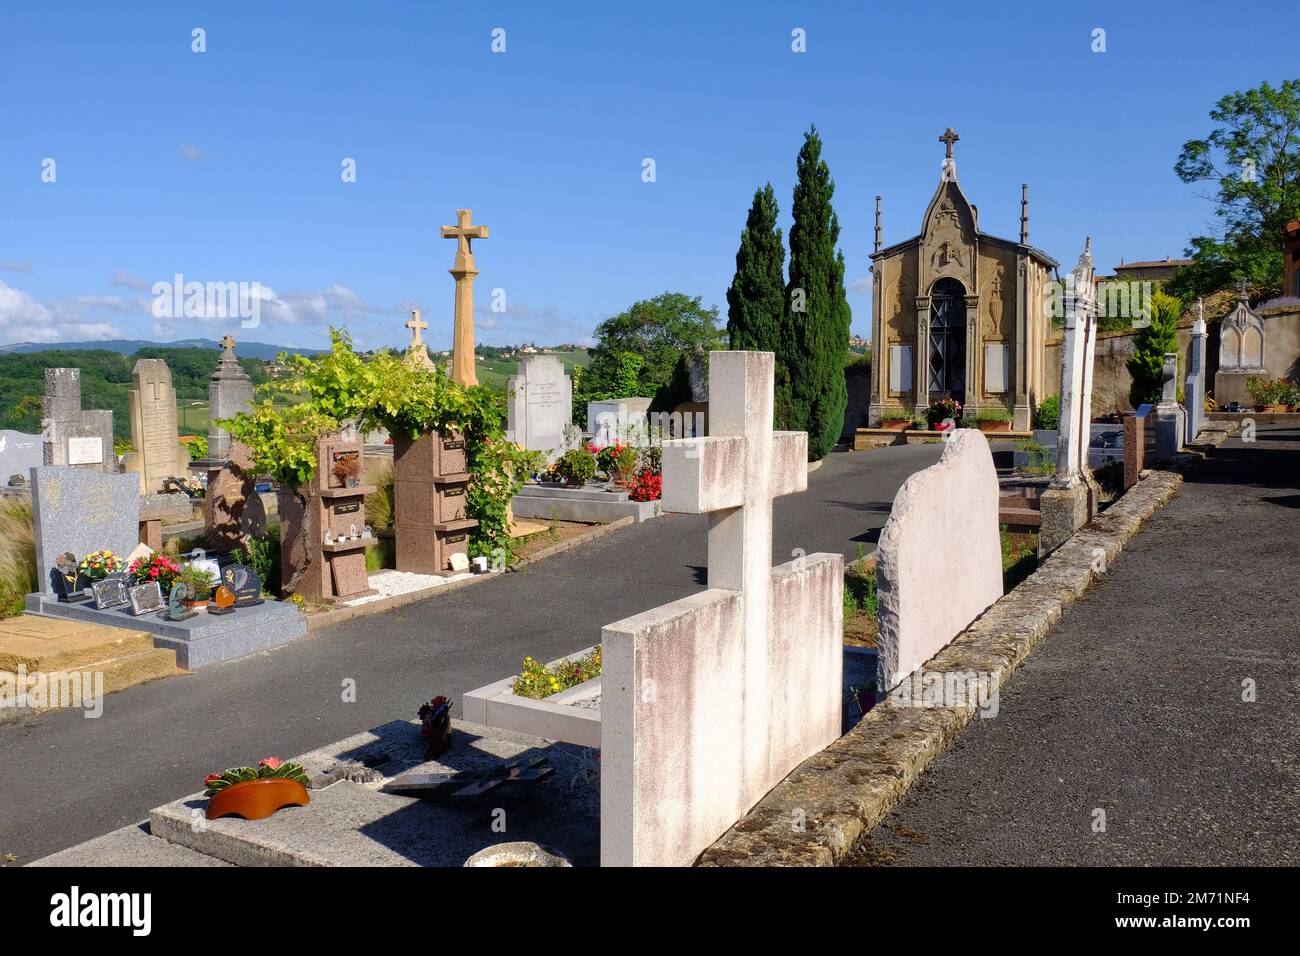 Moire: Cemetery overlooking the hills and vineyards in Moire, Beaujolais, Rhone, France Stock Photo